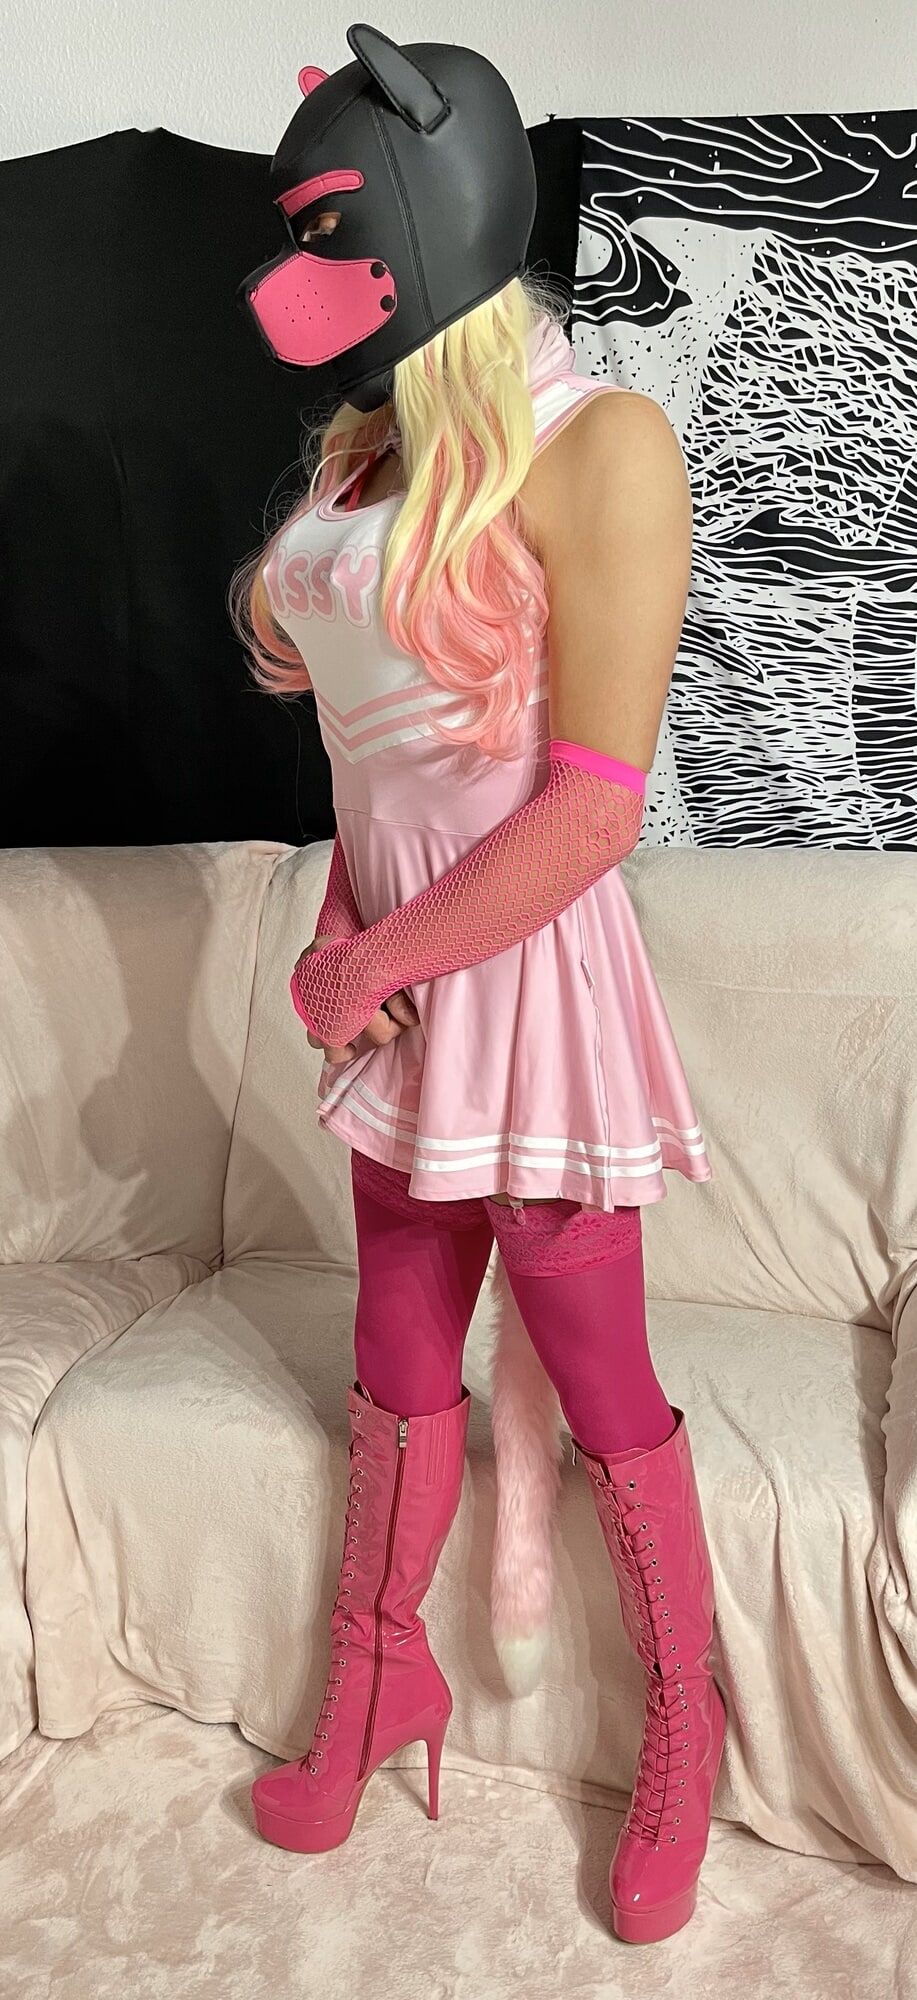 Sissy in Pink High Heels and Pink Lingerie.